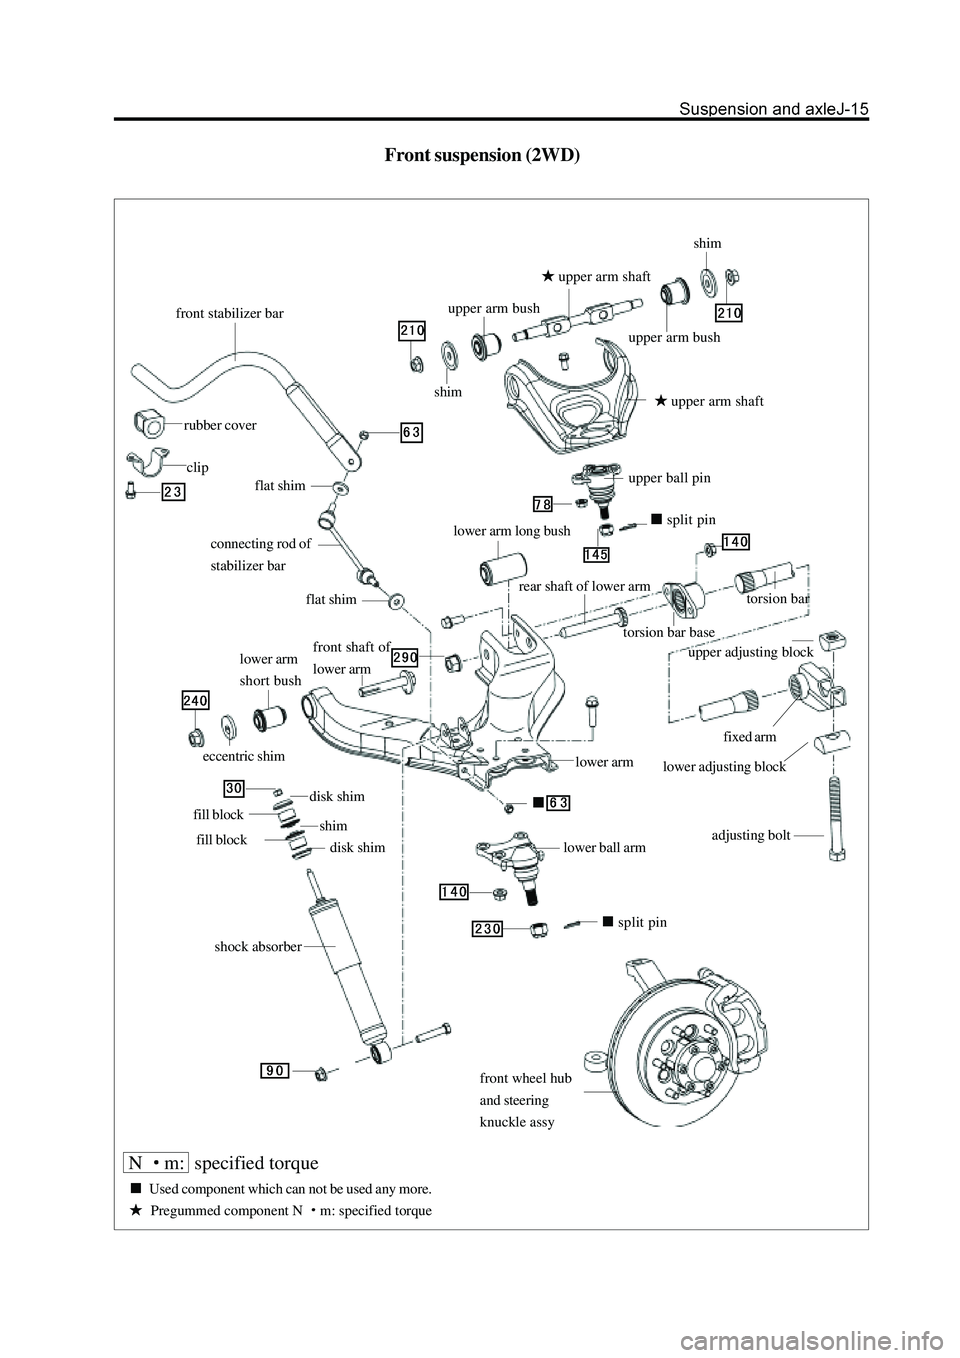 GREAT WALL HOVER 2006  Service Repair Manual Front suspension (2WD)
front stabilizer bar
rubber cover
clip
connecting rod of
stabilizer bar
flat shim
front shaft of
lower arm
split pin
adjusting bolt
lower adjusting block
fixed arm
upper adjusti